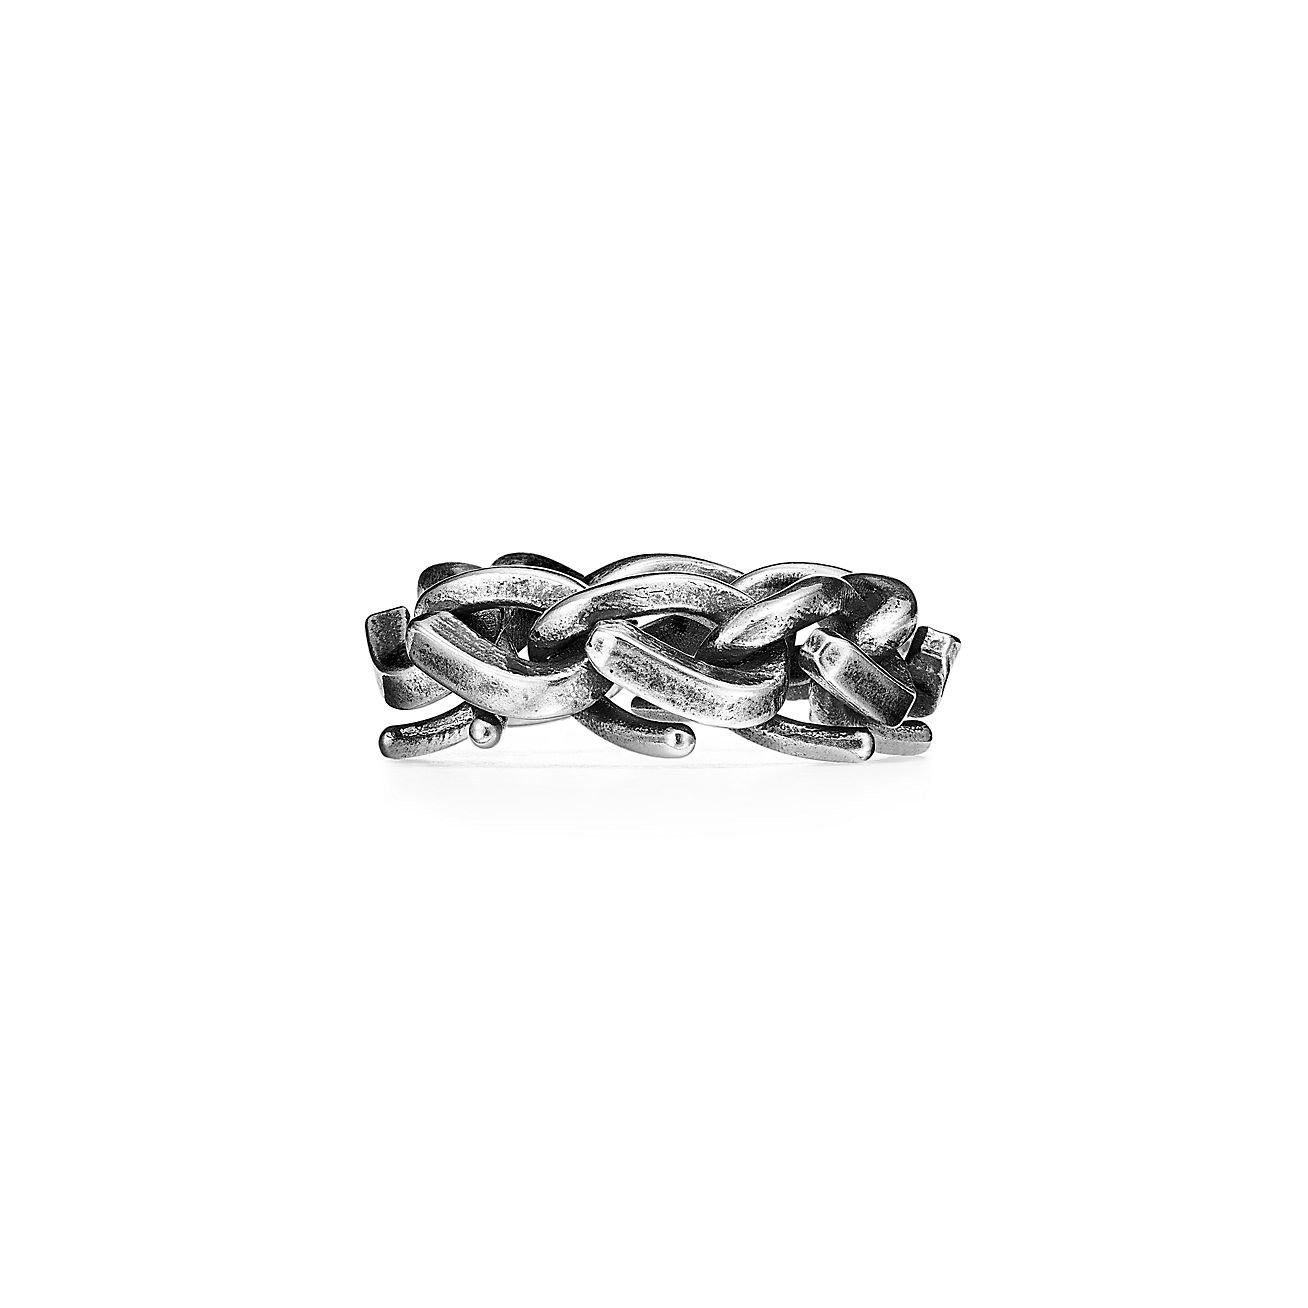 Tiffany Forge Link Ring in Blackened Sterling Silver | Tiffany & Co.